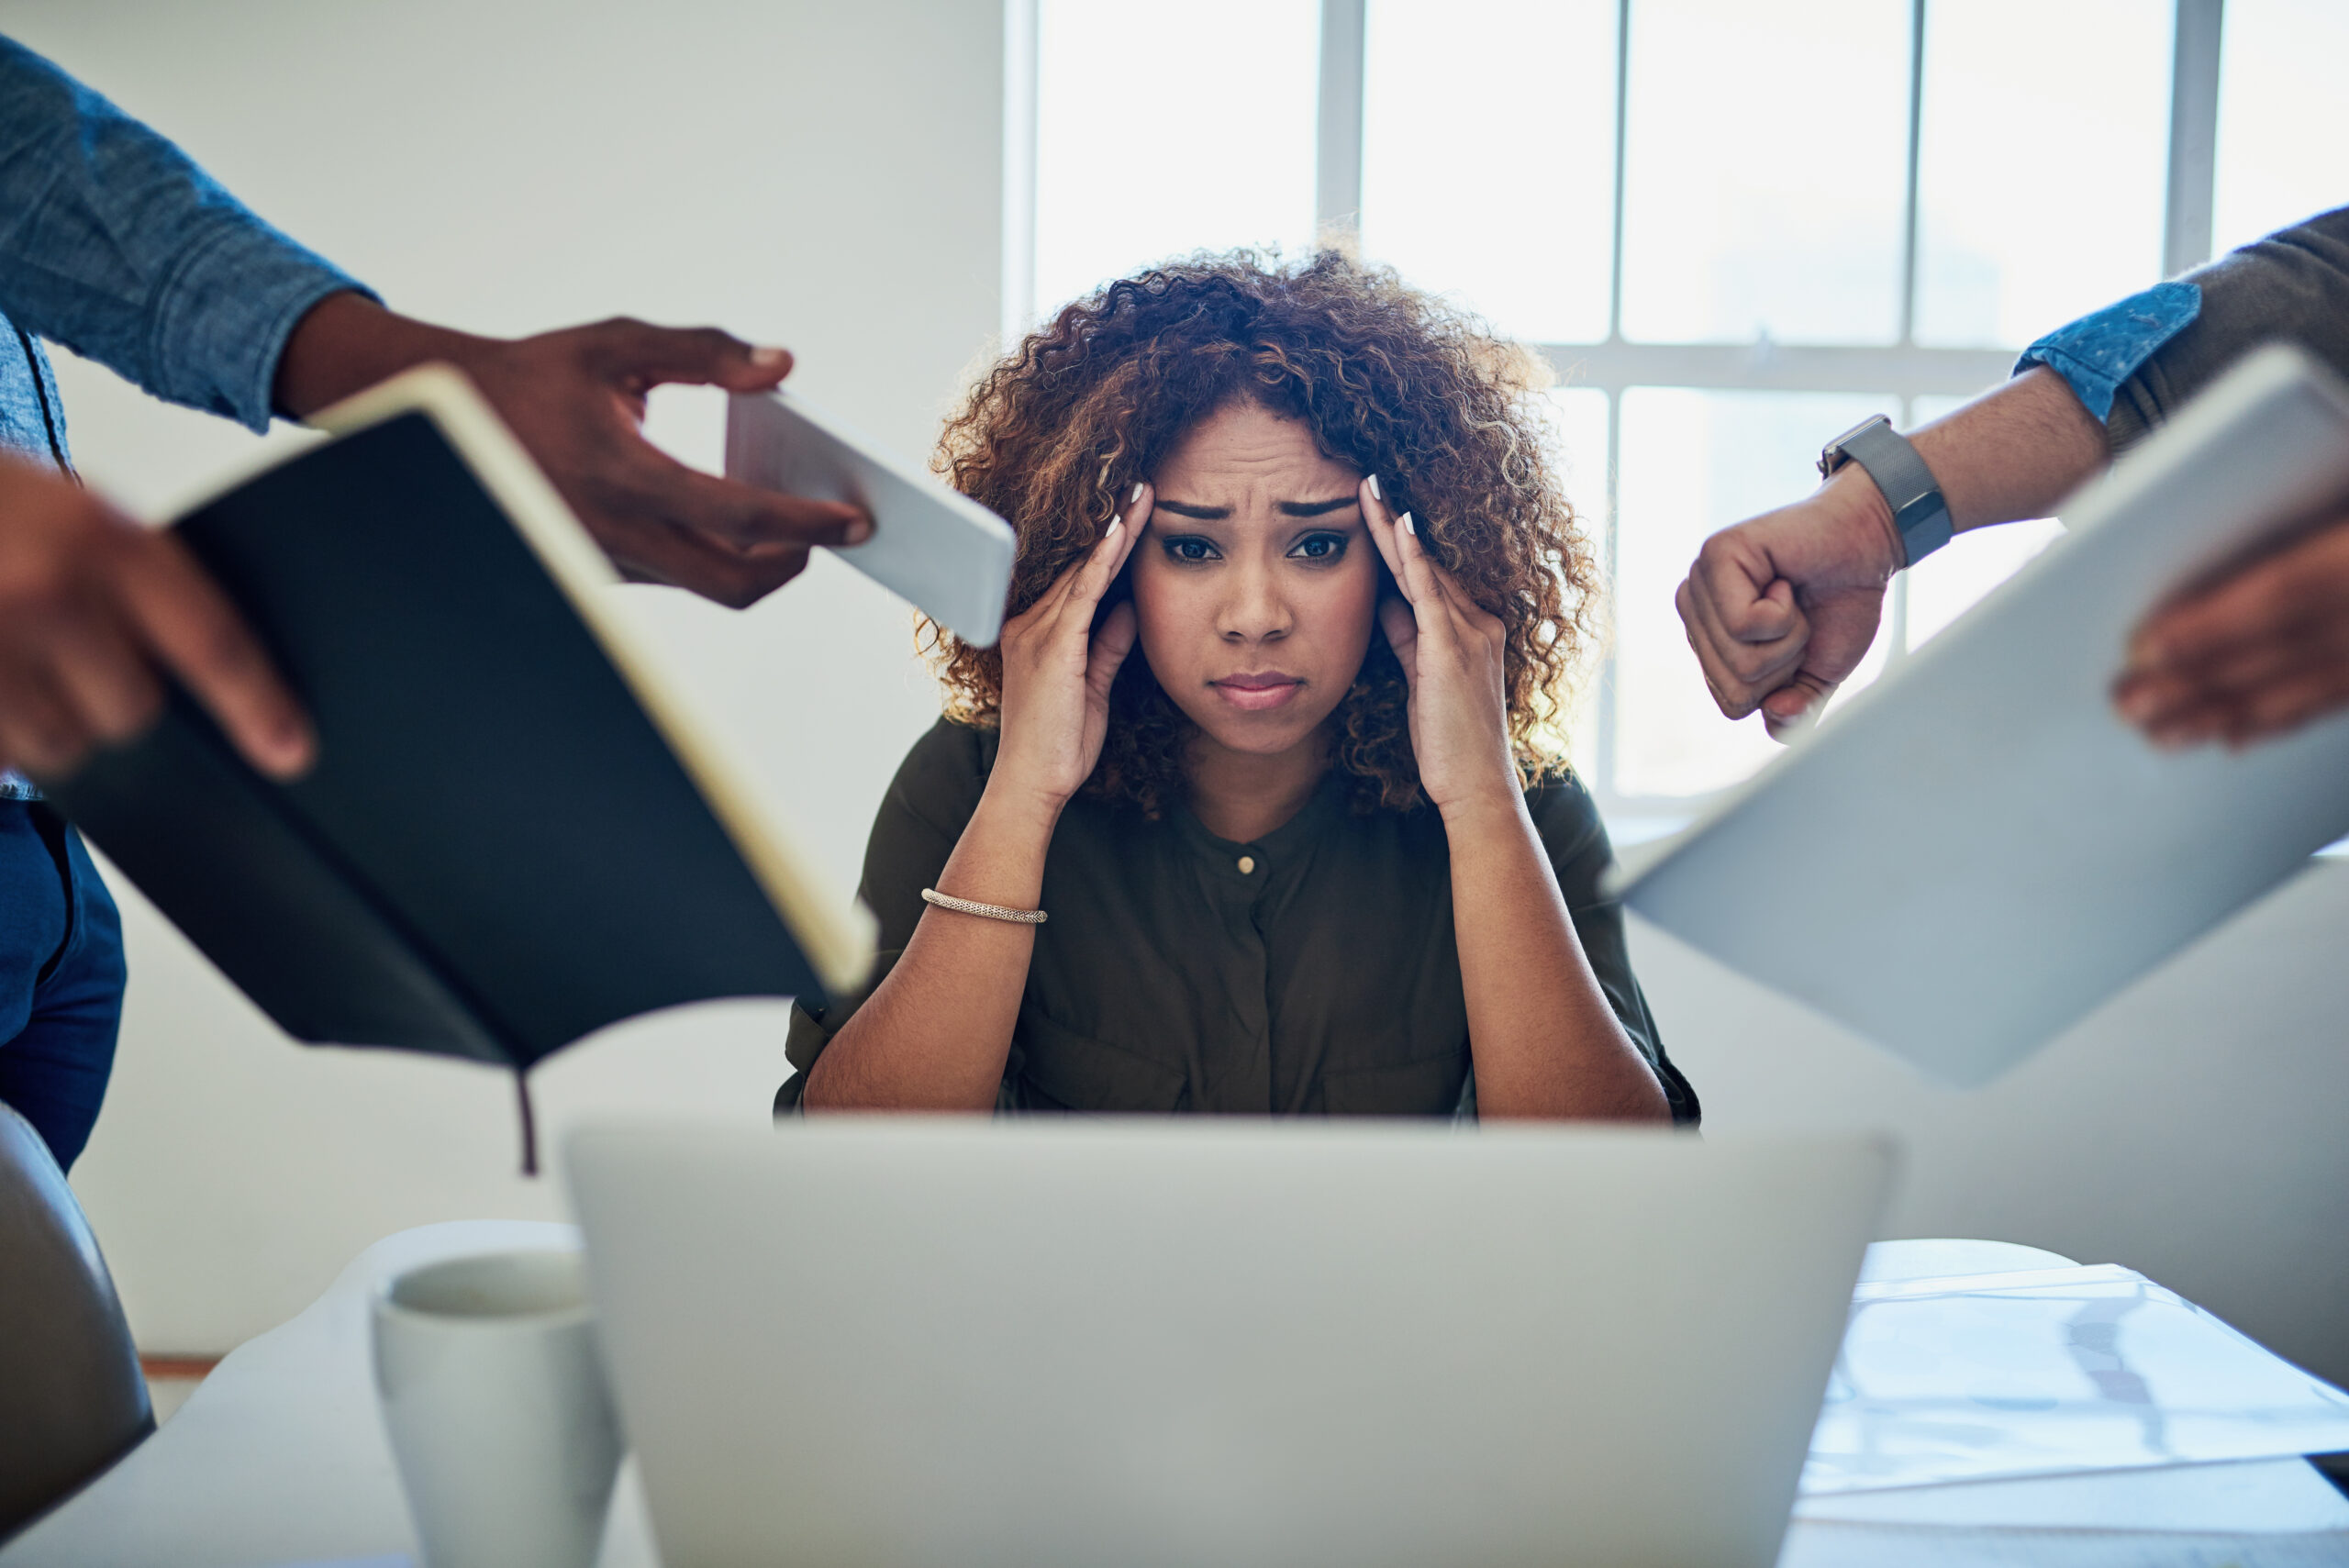 A fundraiser looks stressed out as people keep handing her more tasks [Does Your Fundraiser Have Time for Fundraising?]